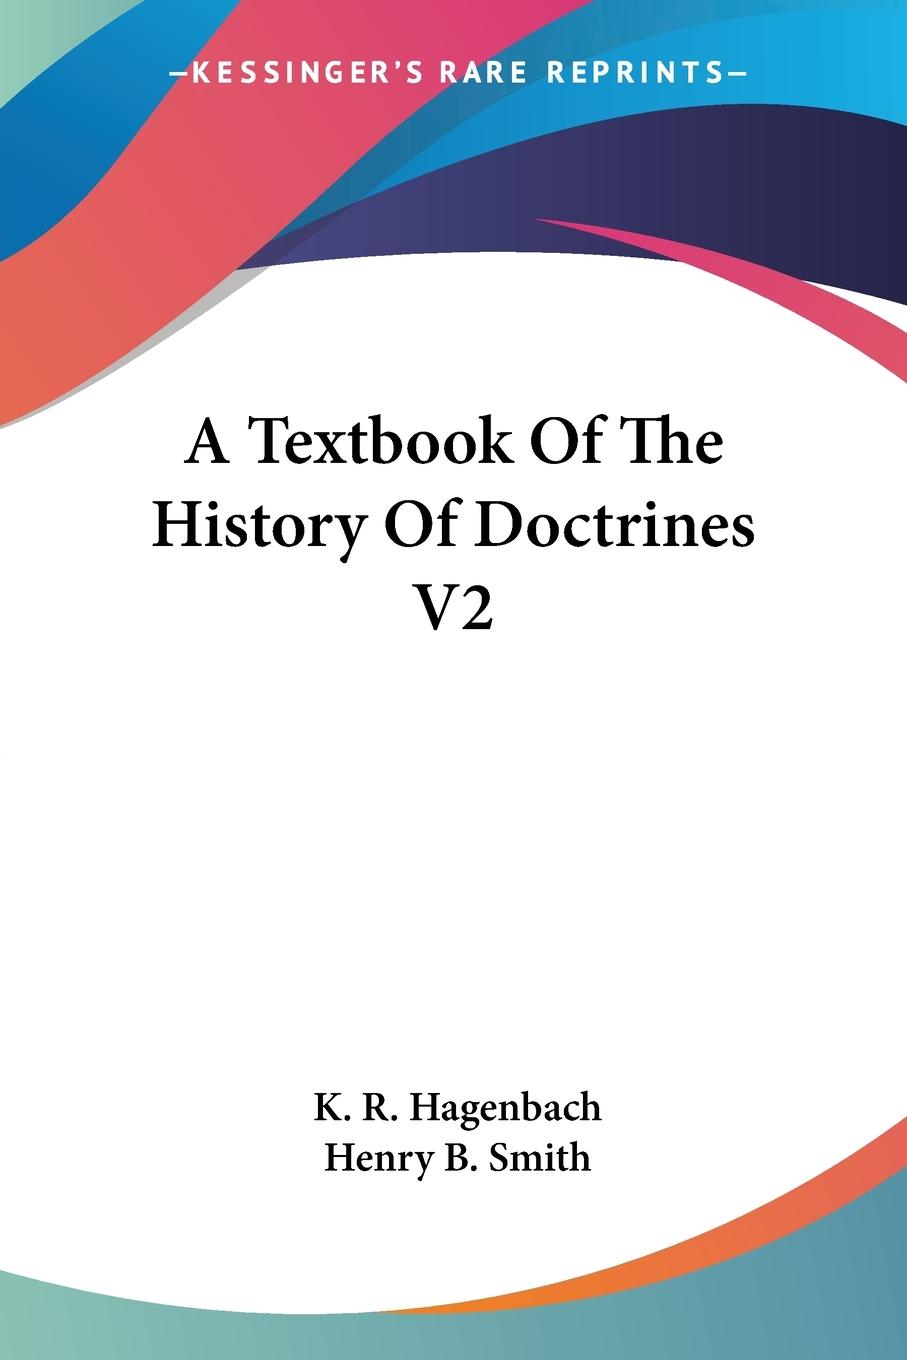 A Textbook Of The History Of Doctrines V2 - Hagenbach, K. R.